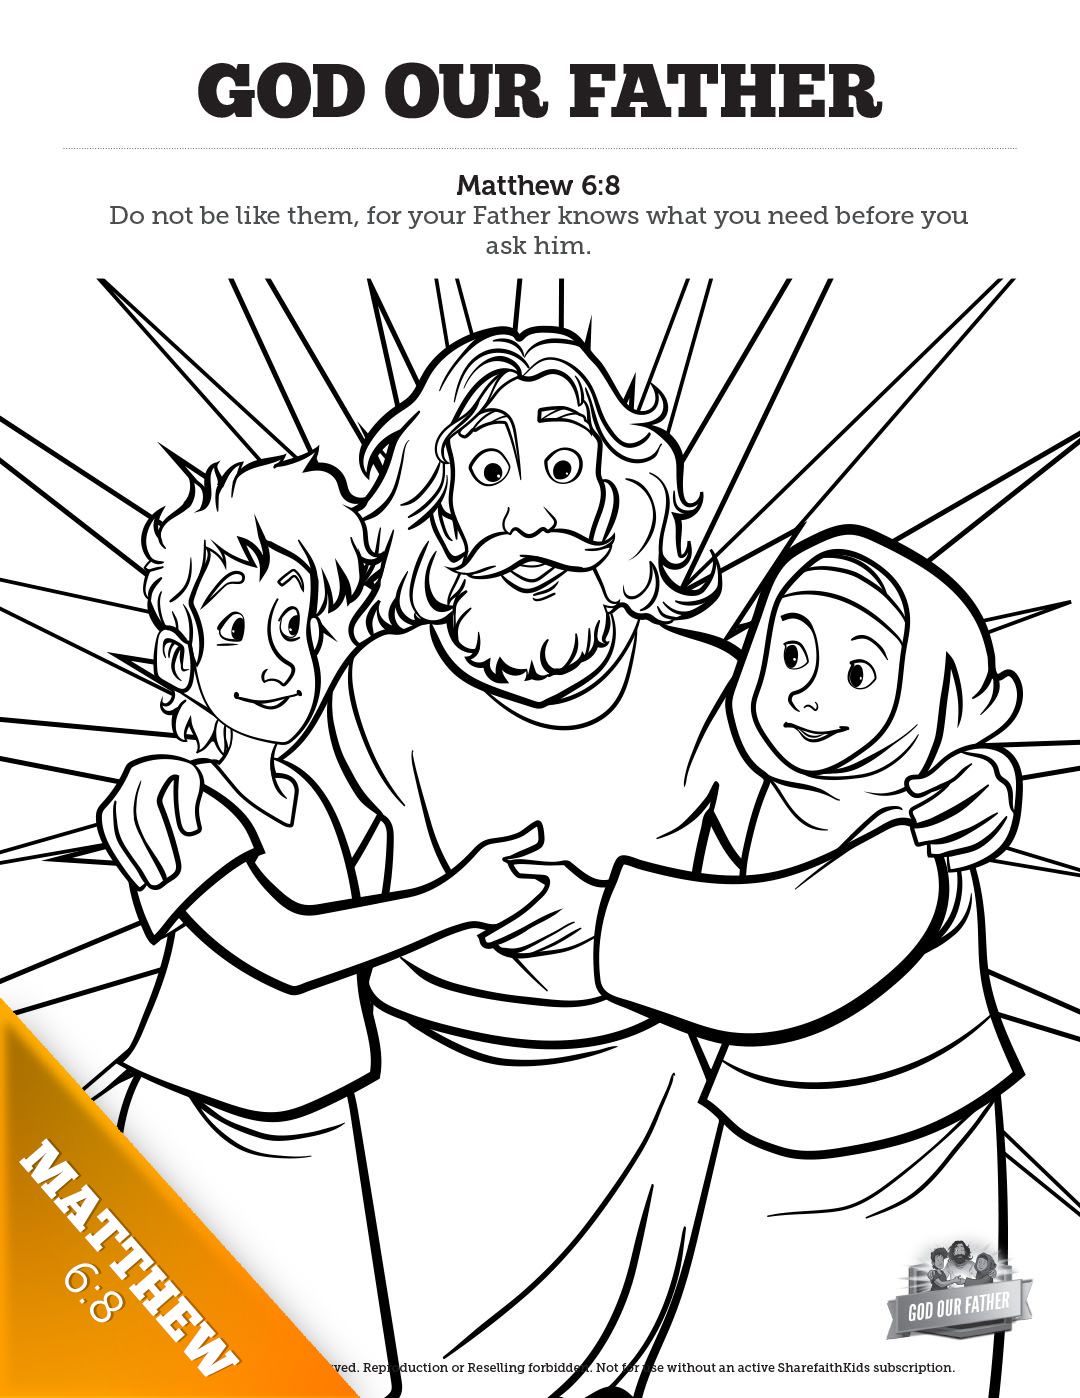 Easter sale save sunday school coloring pages bible activities for kids school coloring pages